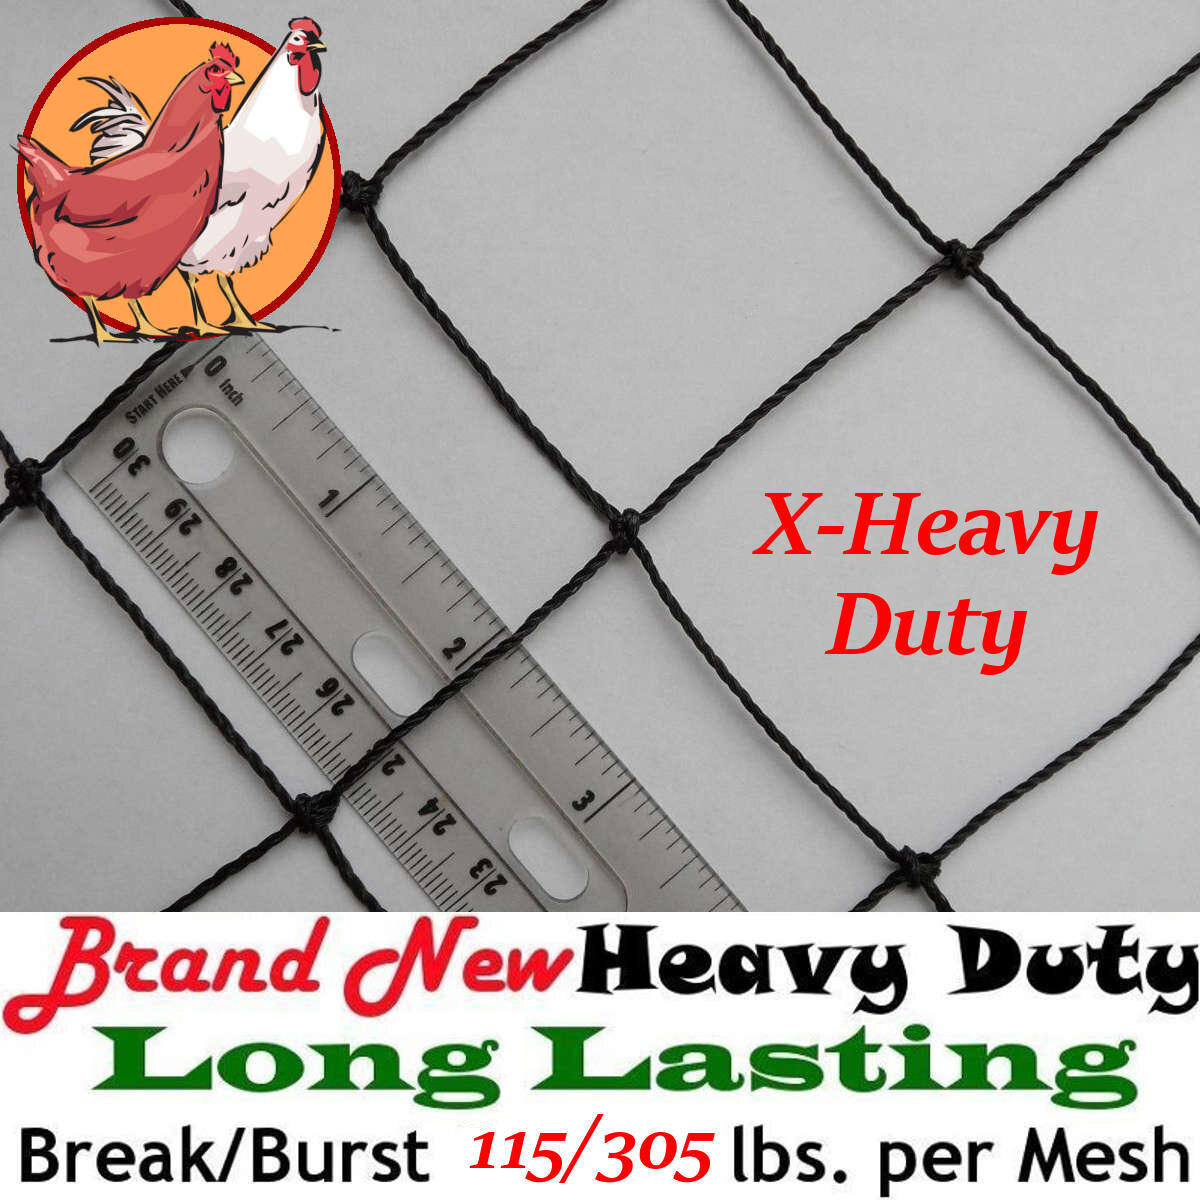 Heavy Knotted Poultry Netting (1Mesh) | UV Stabilized for long life and  durability | Your One Stop Poultry Supply Shop!